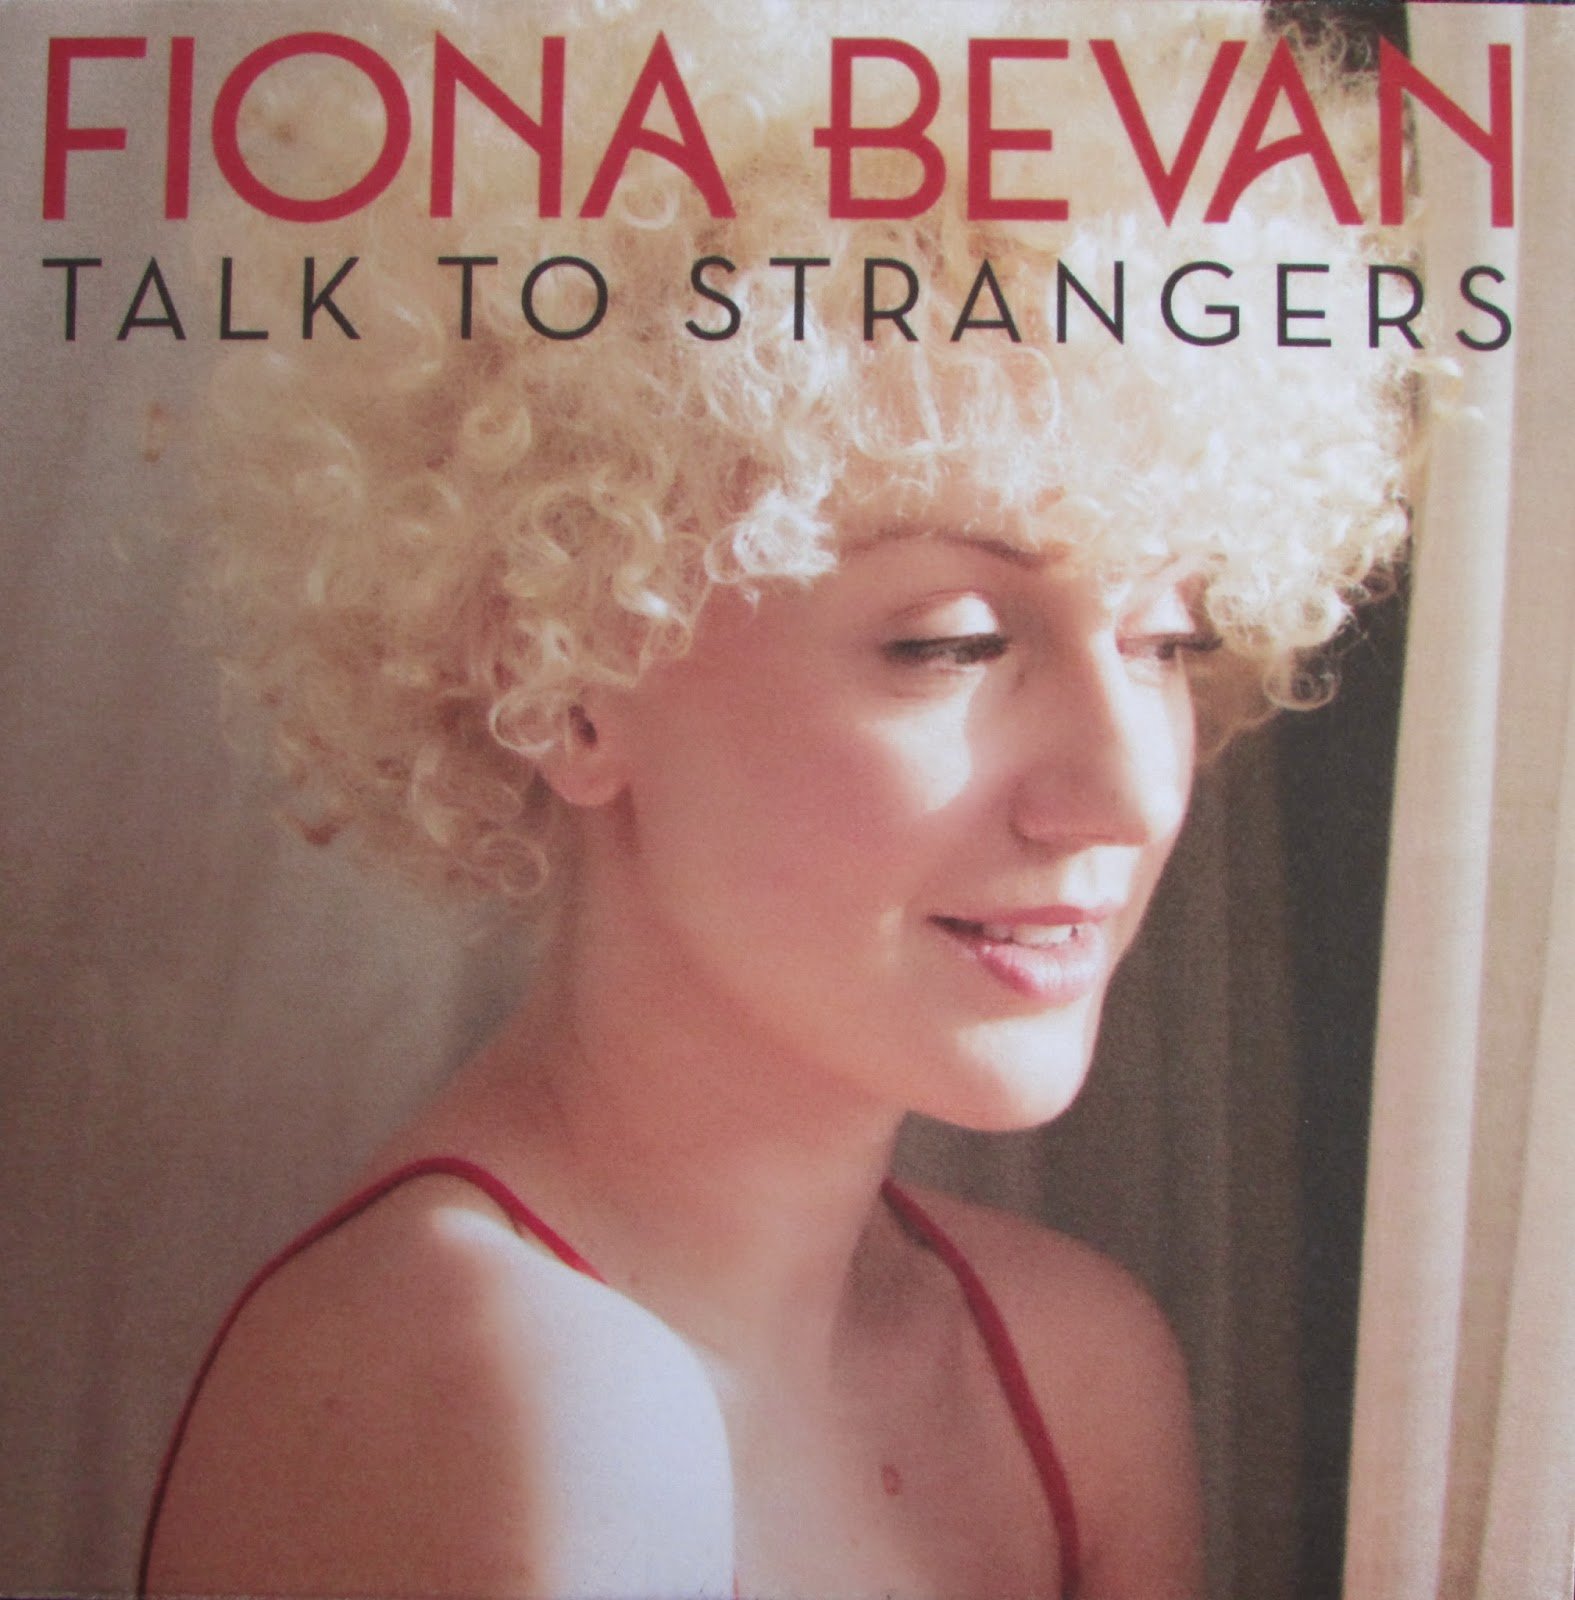 Fiona Bevan album cover, talk to strangers, Rebel Without a Cause, singer-songwriter, One Direction, Ed Sheeran - HeadStuff.org